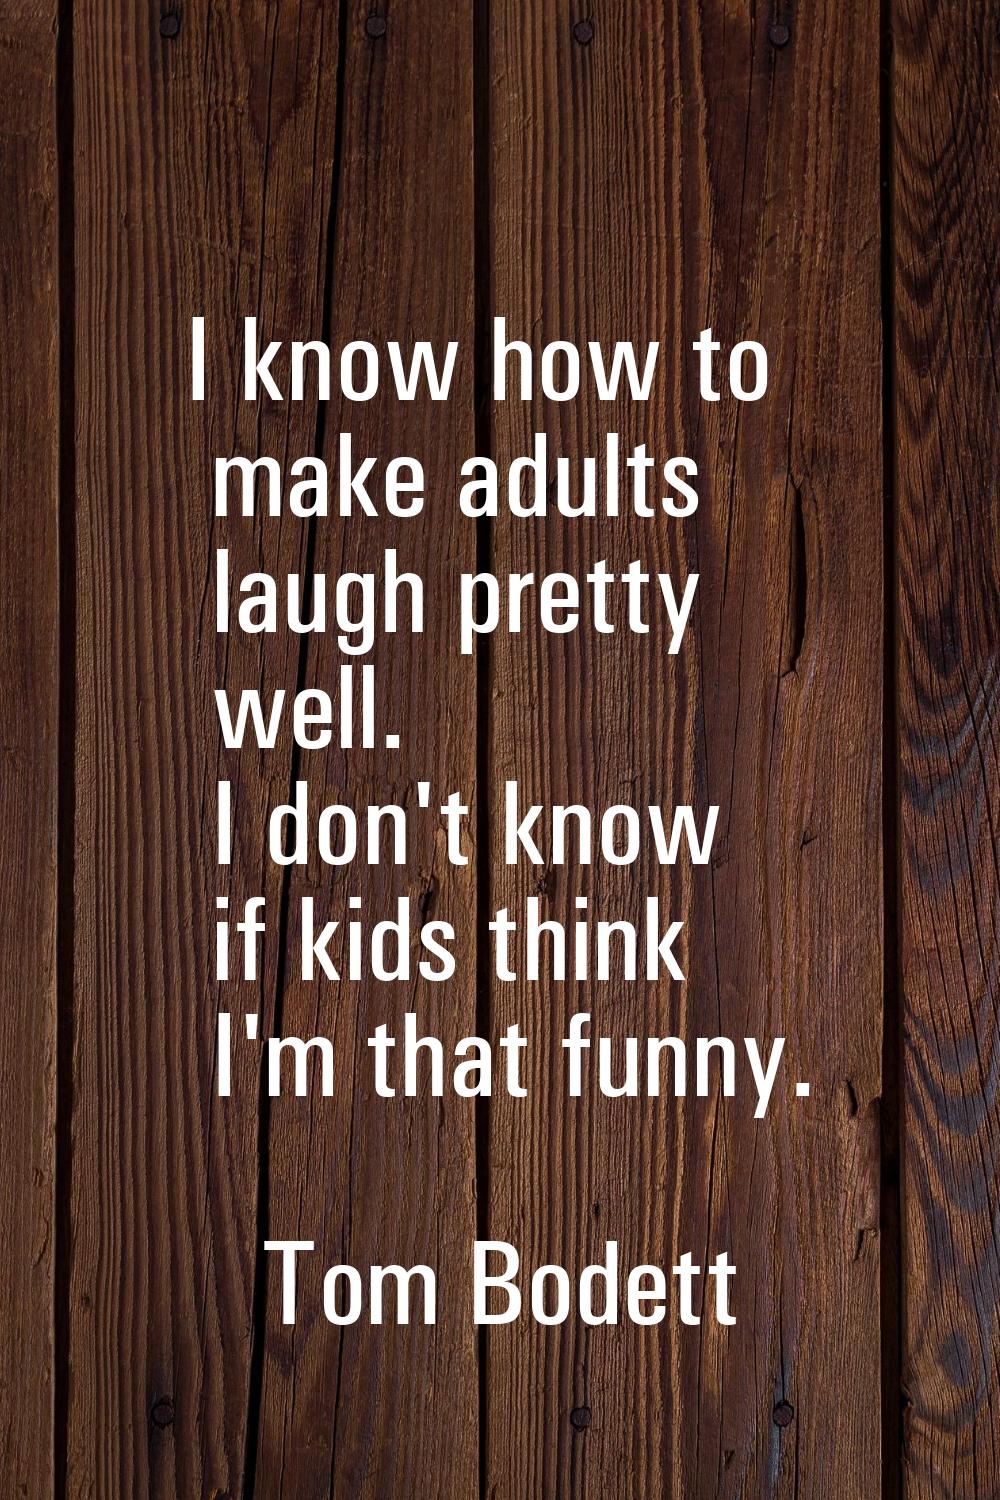 I know how to make adults laugh pretty well. I don't know if kids think I'm that funny.